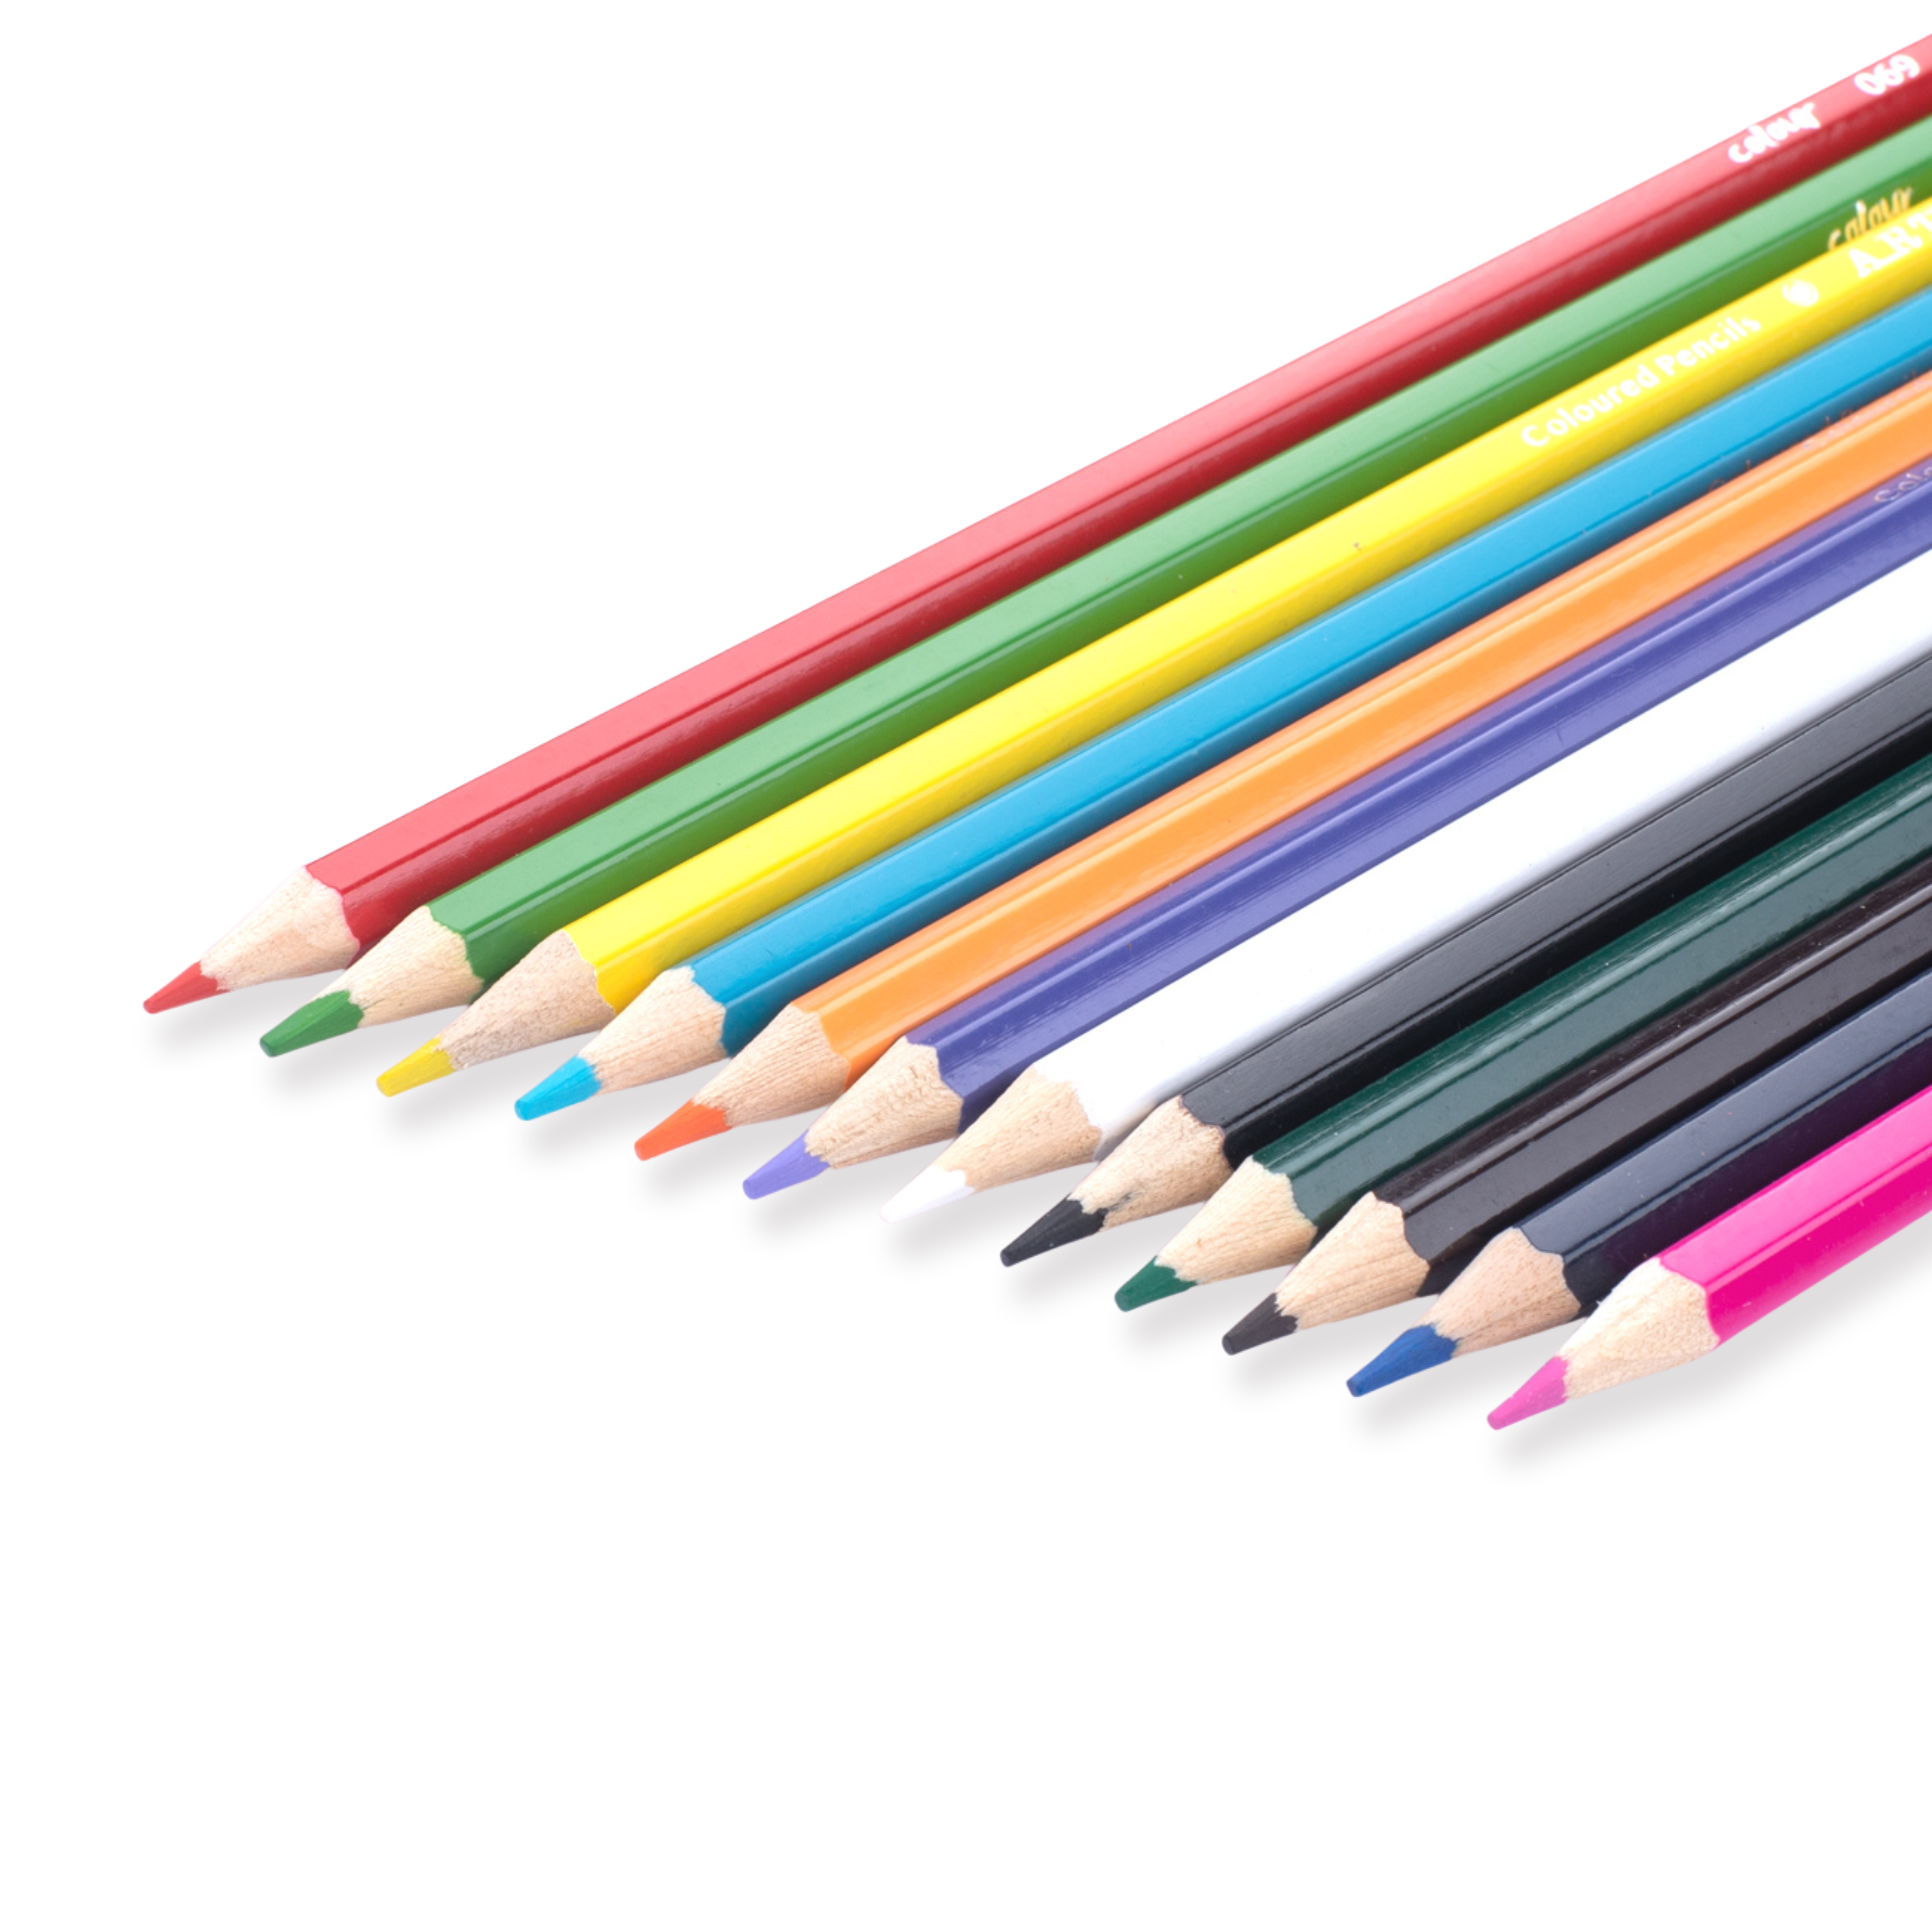 Arttrack Oil-Based Colored Pencils - Set of 12 - Stationery Pal